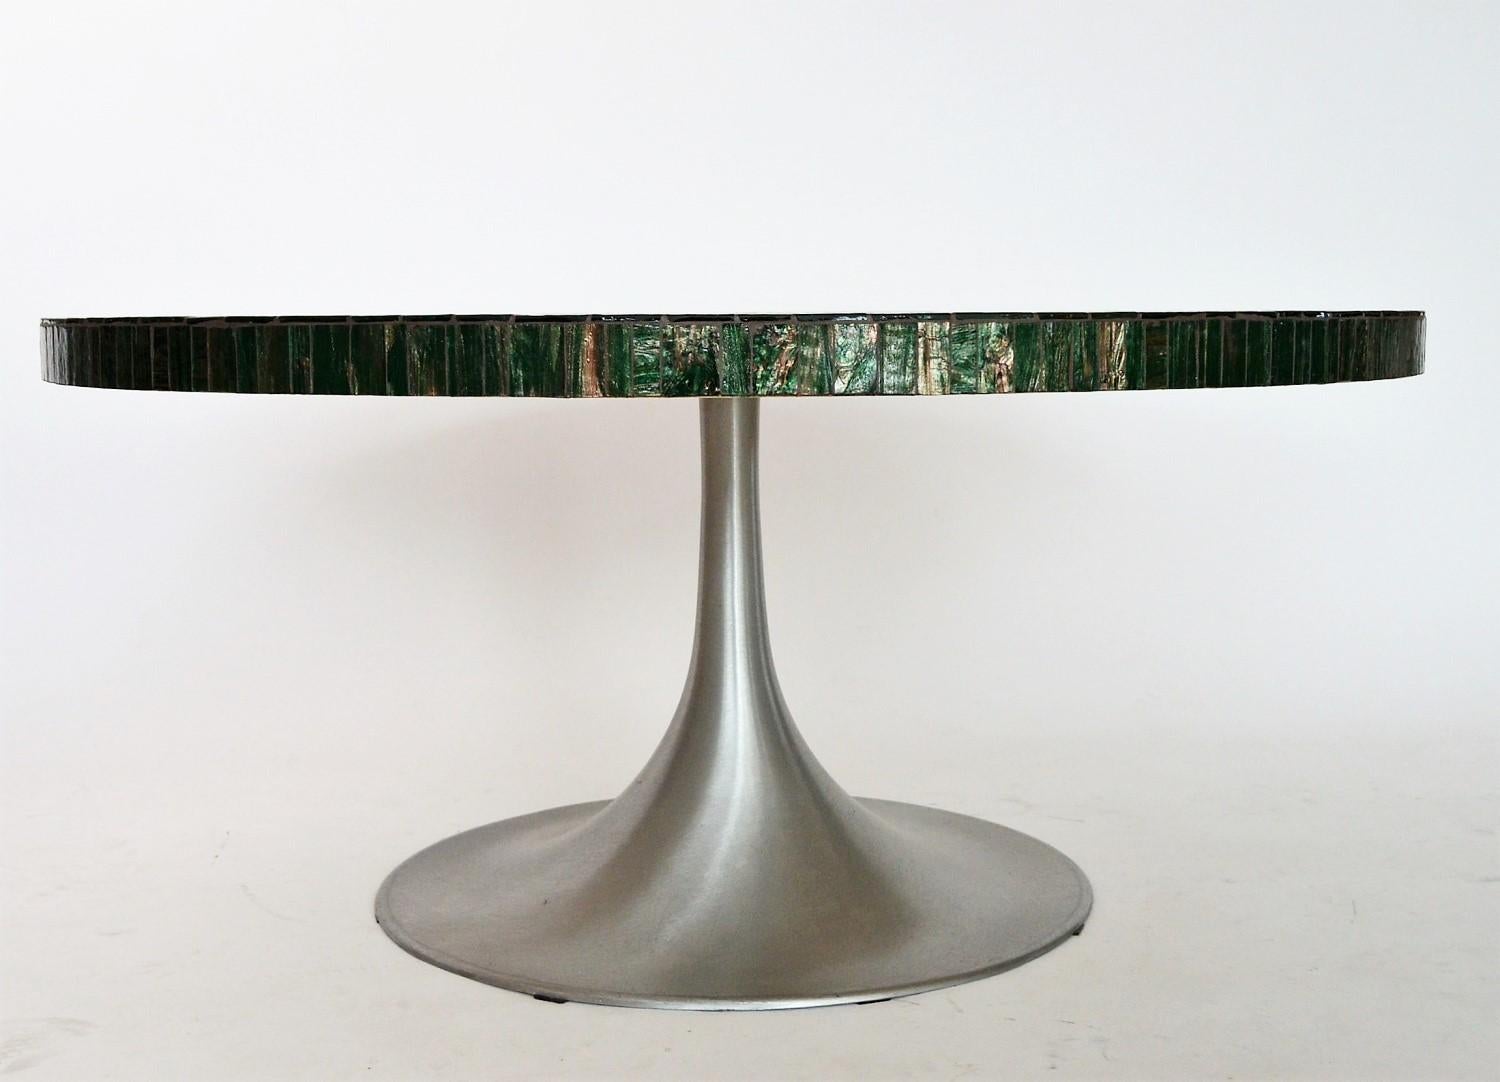 German Midcentury Green Mosaic Tulip Coffee Table by Heinz Lilienthal, 1960s